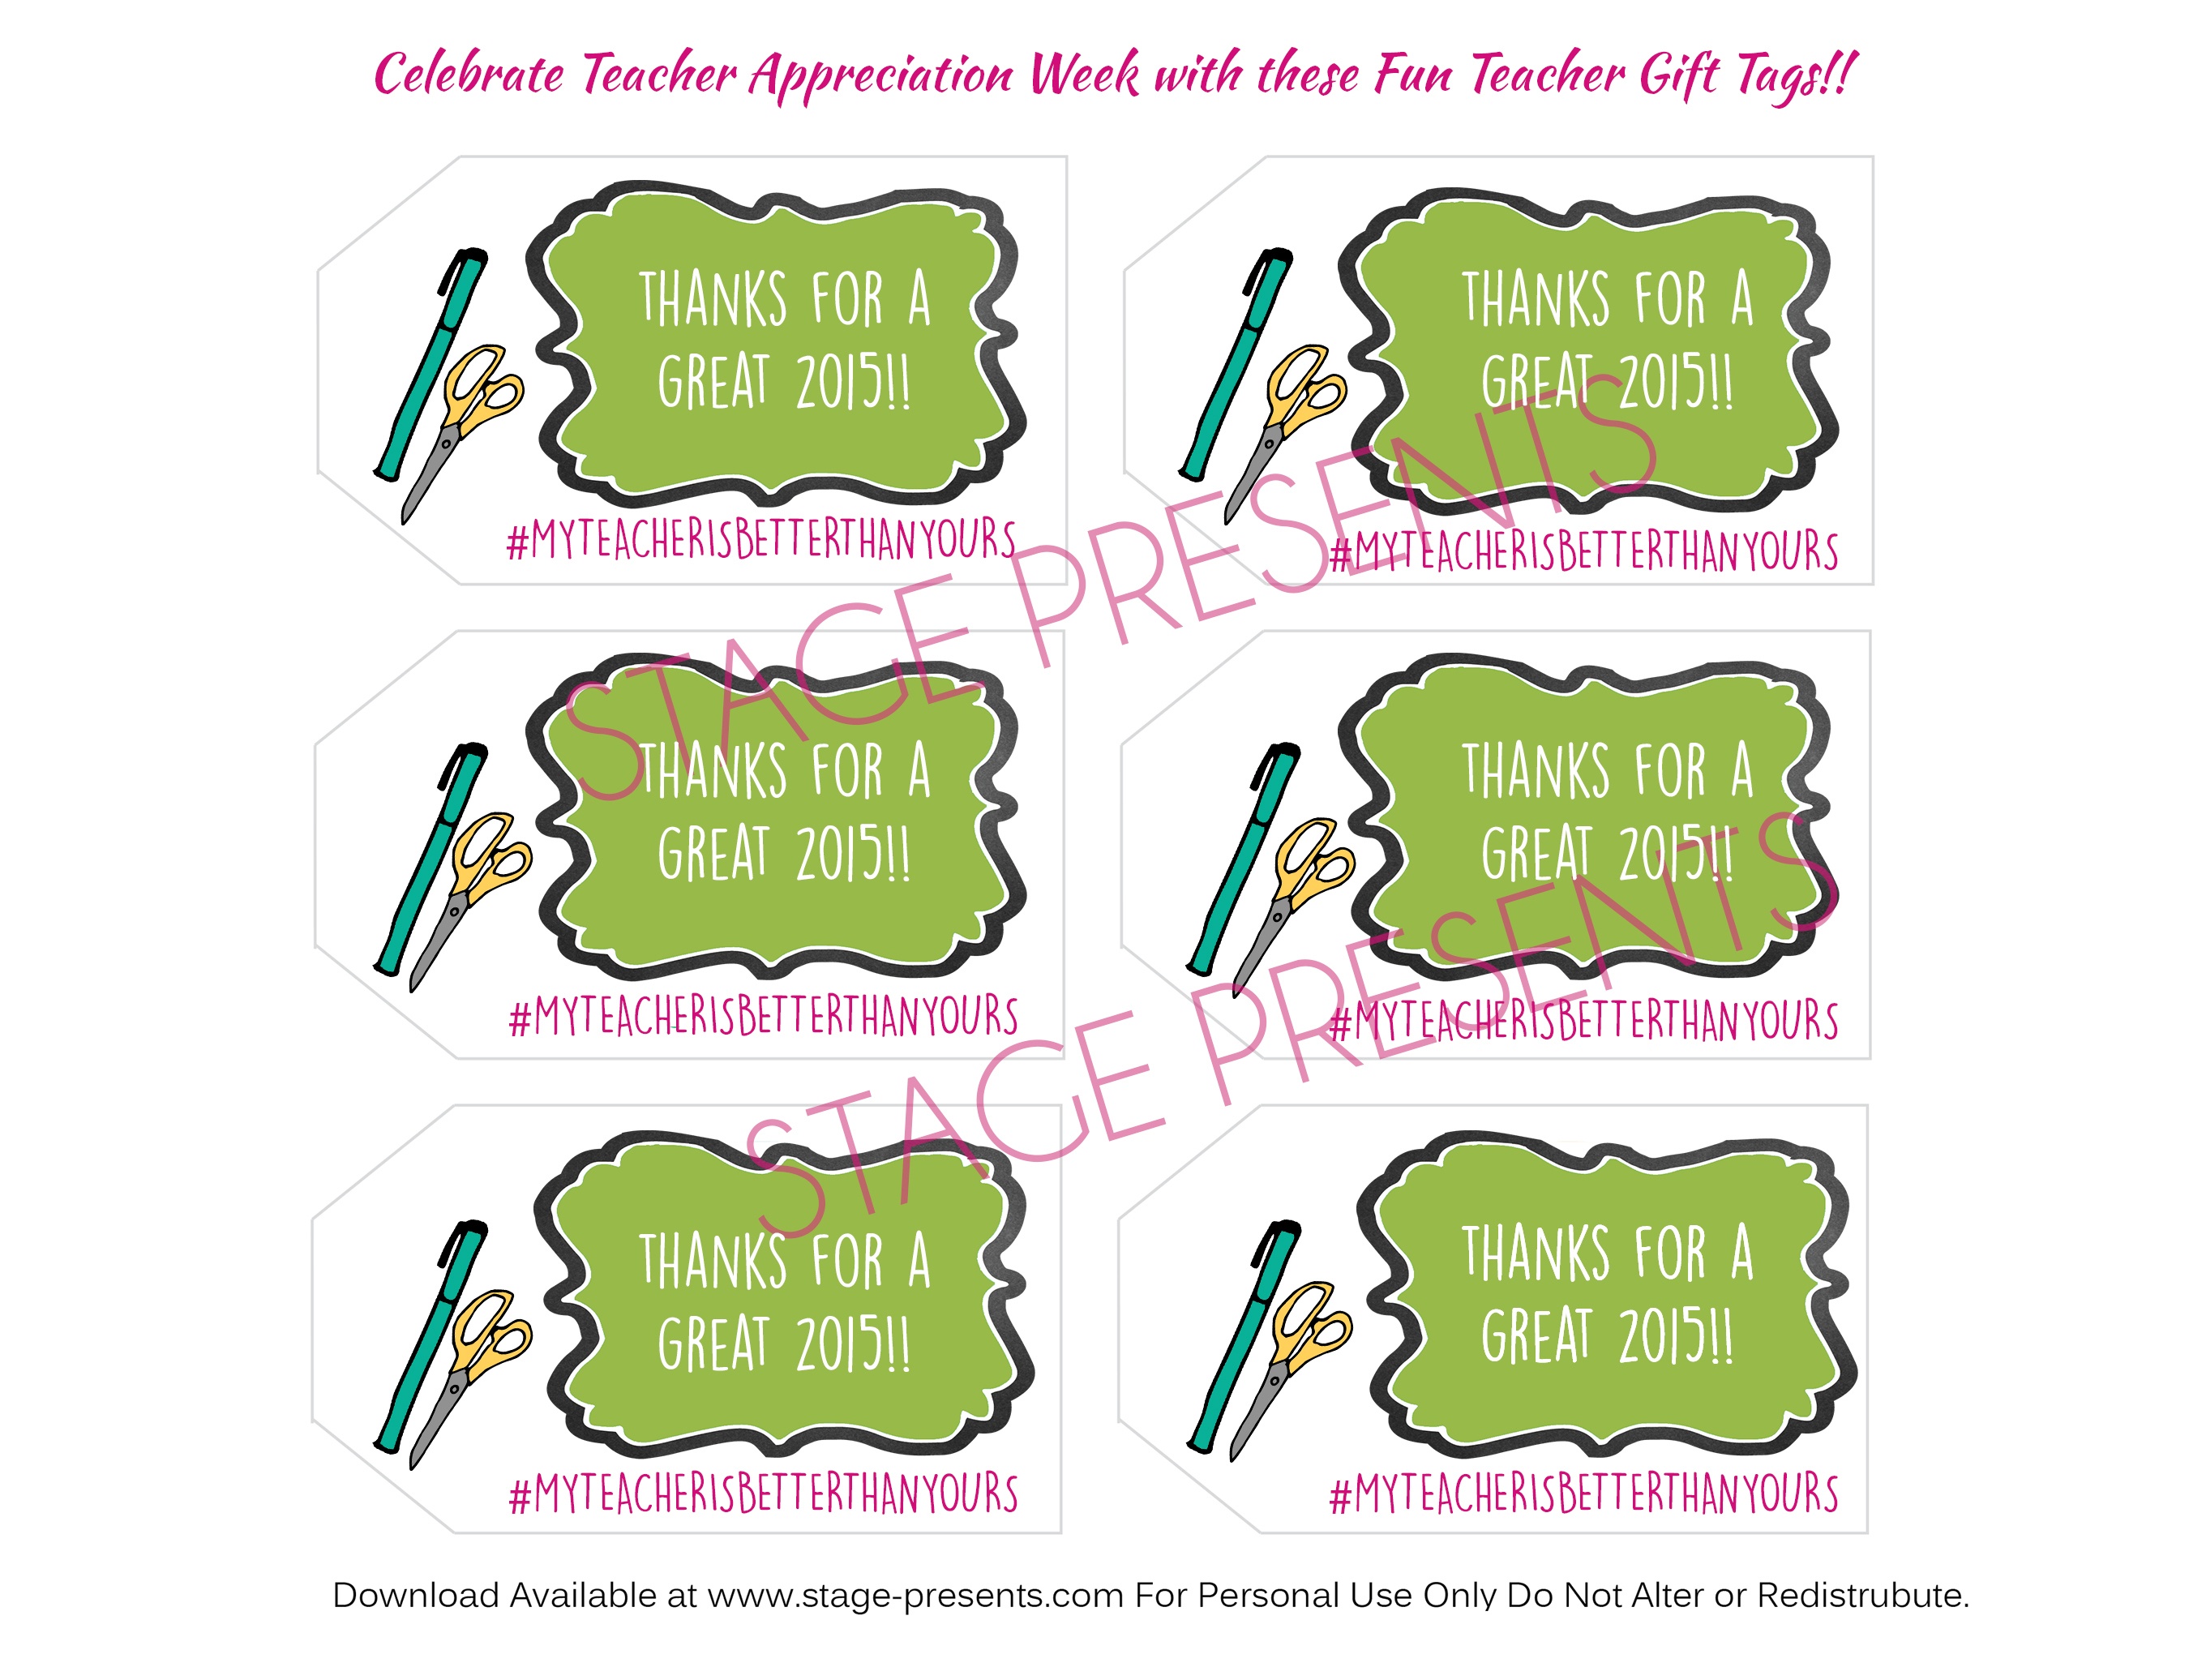 A Salute To Dedicated And Devoted Teachers + Free Printable Teacher - Free Printable Teacher Appreciation Gift Tags